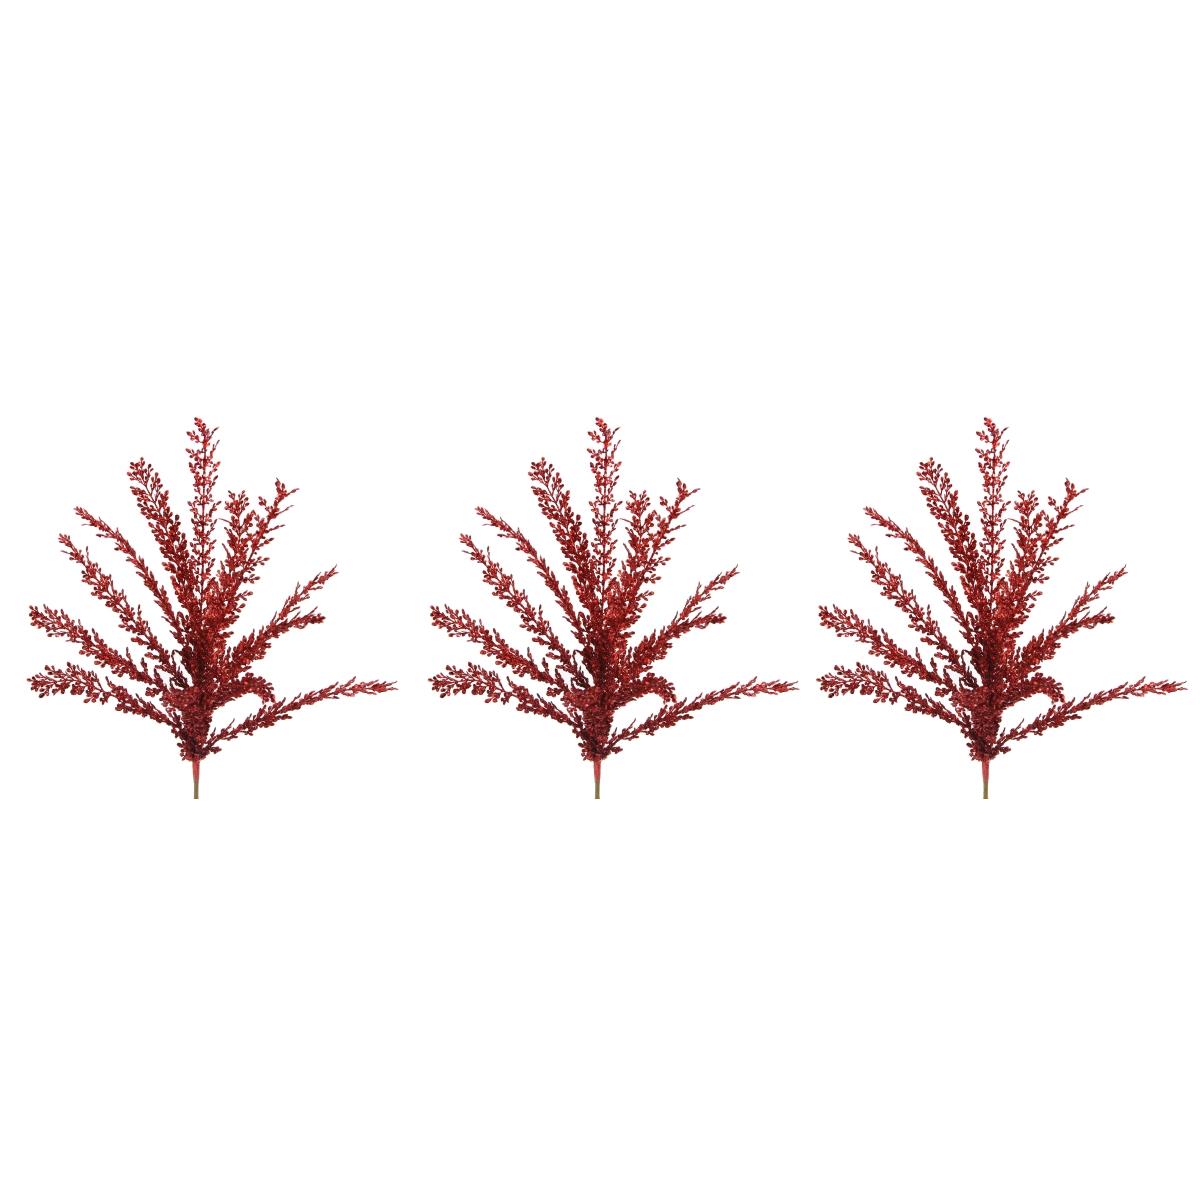 Admired By Nature Gxl7706-red-3 23 In. Glitter Filigree Leaf Spray Christmas Decor, Red - Set Of 3